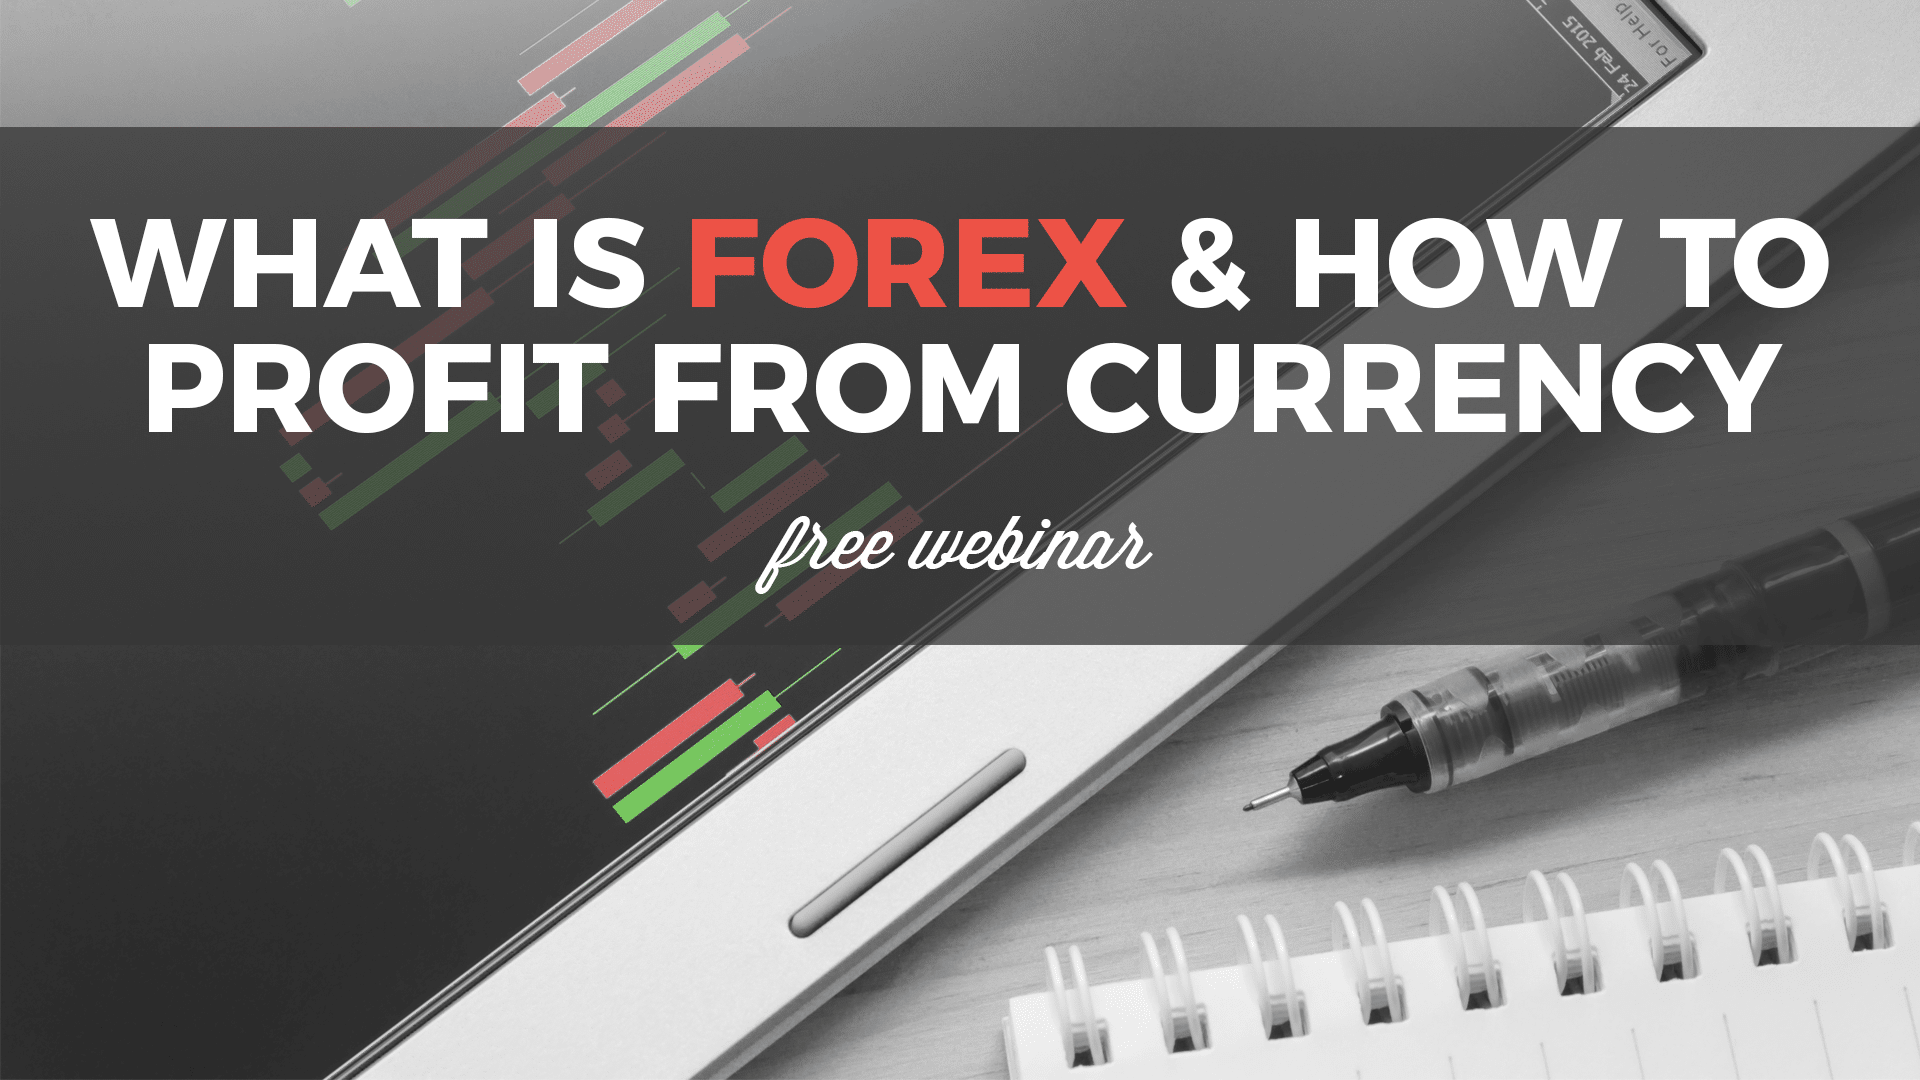 Webinar Forex Video: How to Profit from Currency